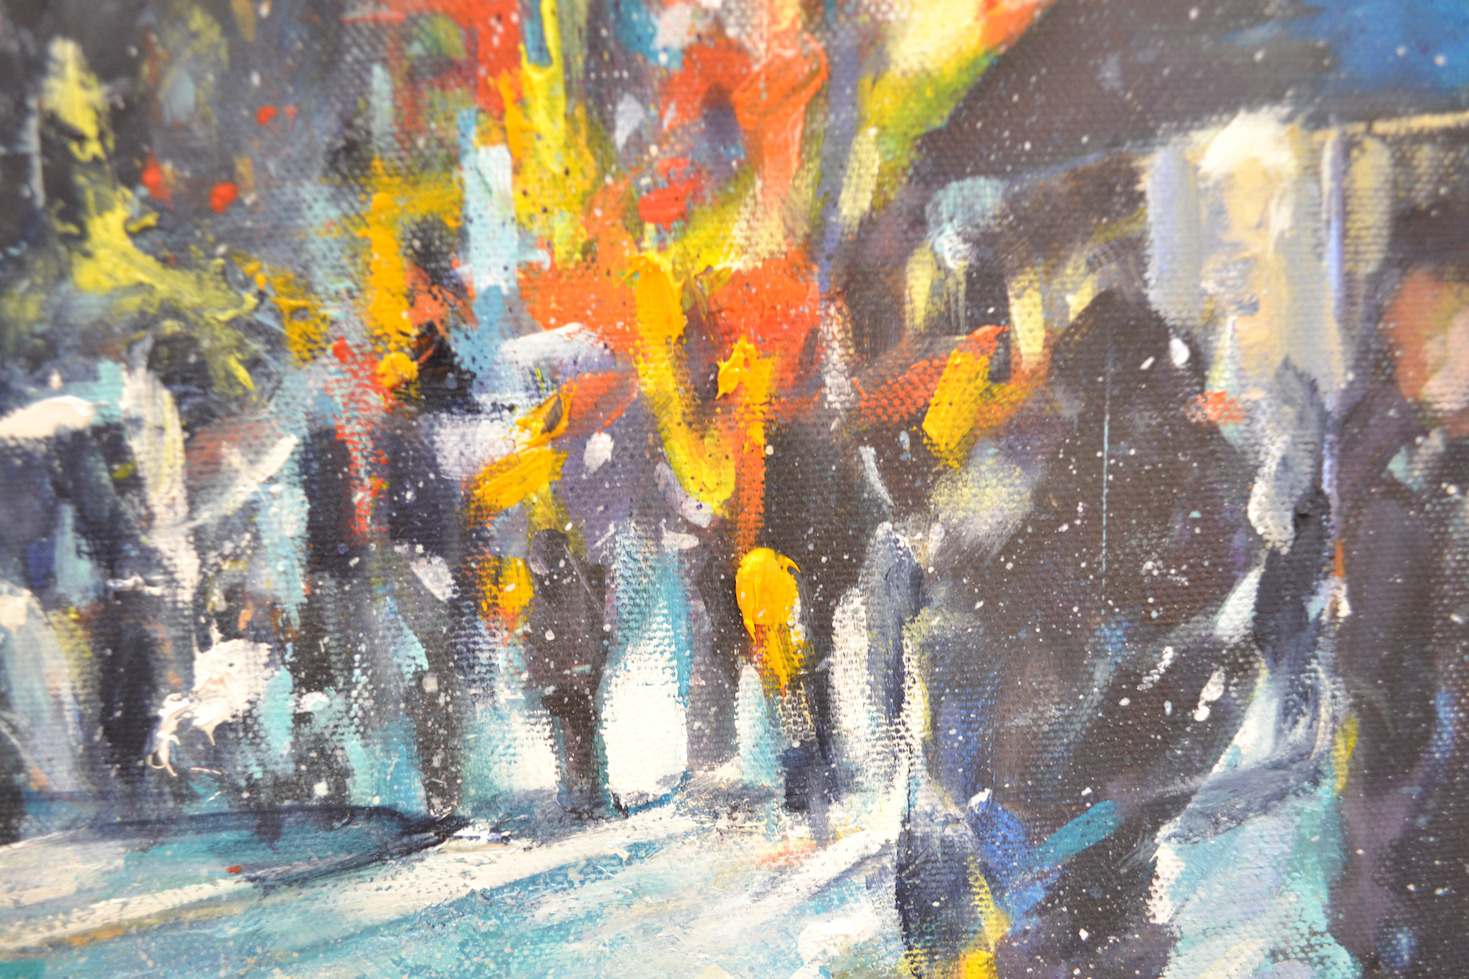 Close Up Detail 2 Of Acrylic Painting "Time Square Intersection" By Judith Dalozzo